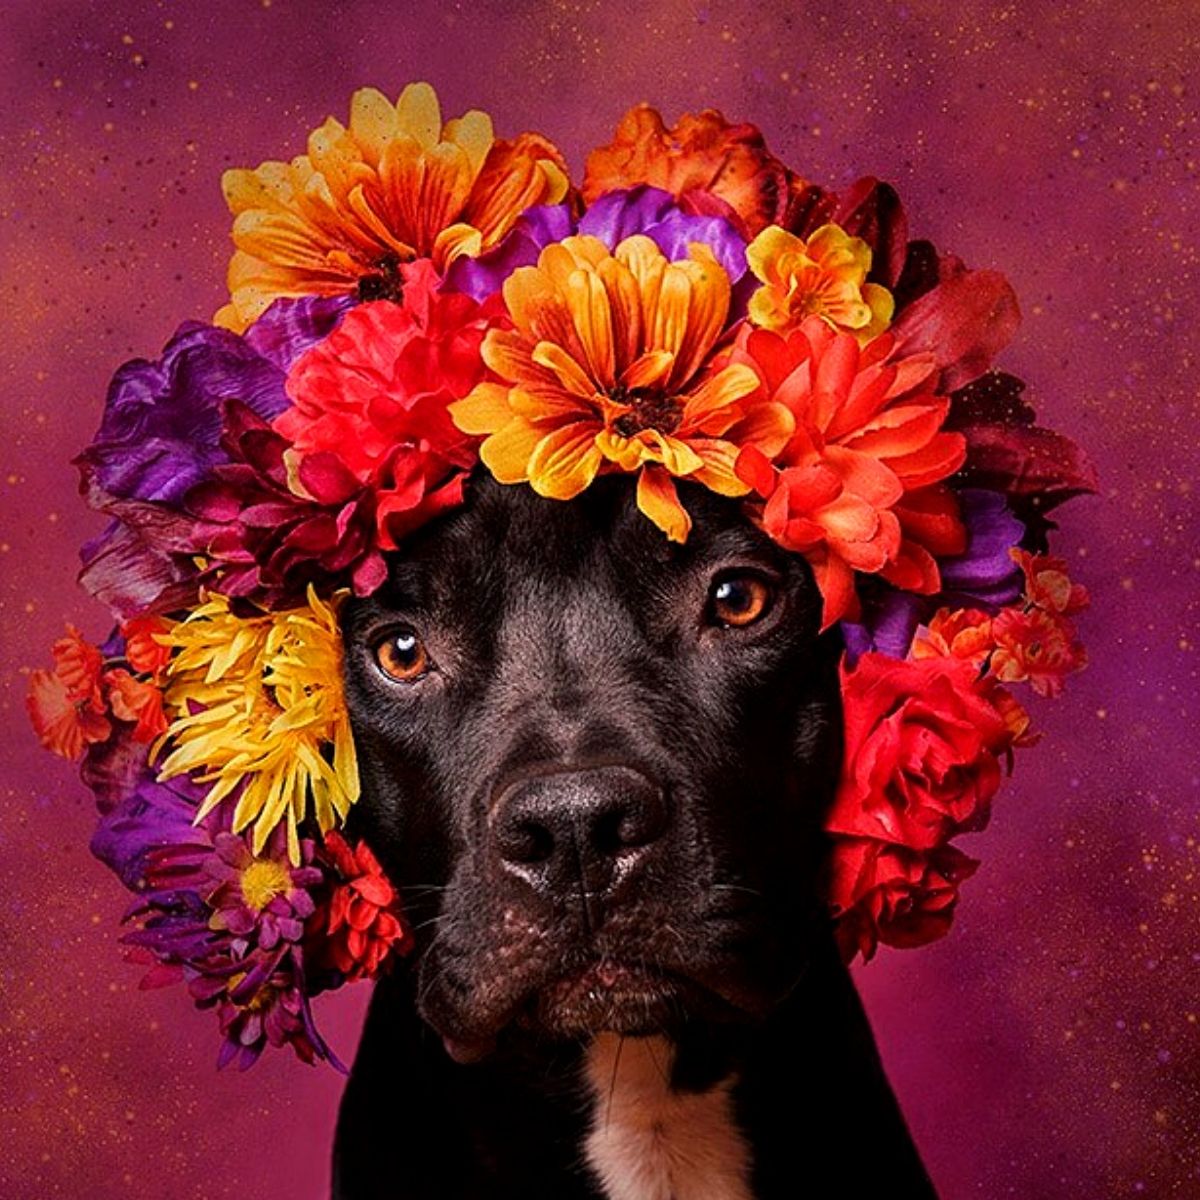 Sophie Gamand’s Revolutionary Portraits of Pit Bulls Donning Flower Crowns